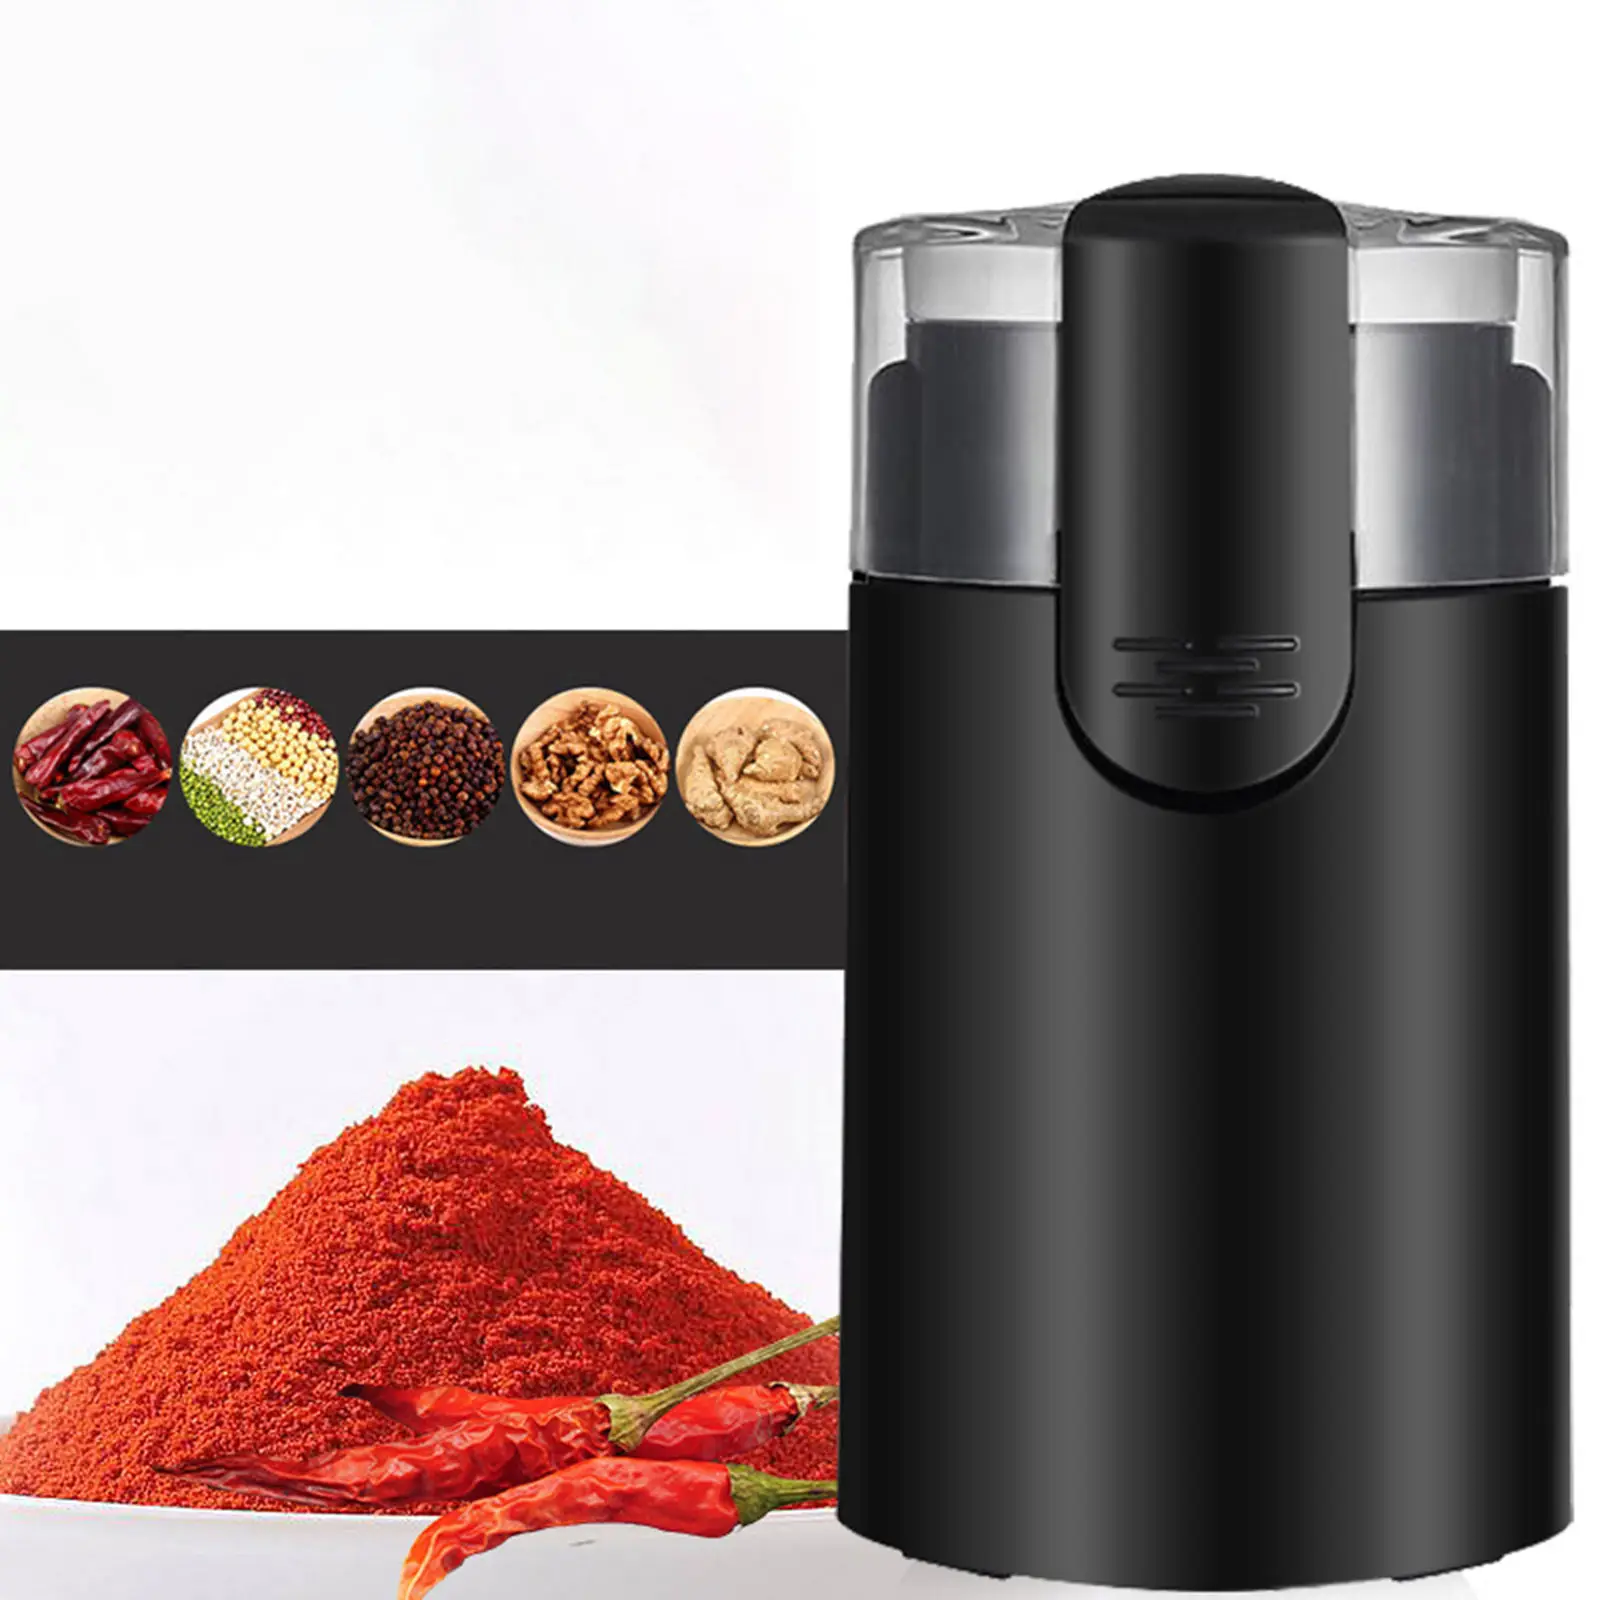 

Portable Coffee Bean Grinder Removable Design Small 150W Nut Grain Grinder Grain Mills Spice Grinder for Spices Grains Dry Herb